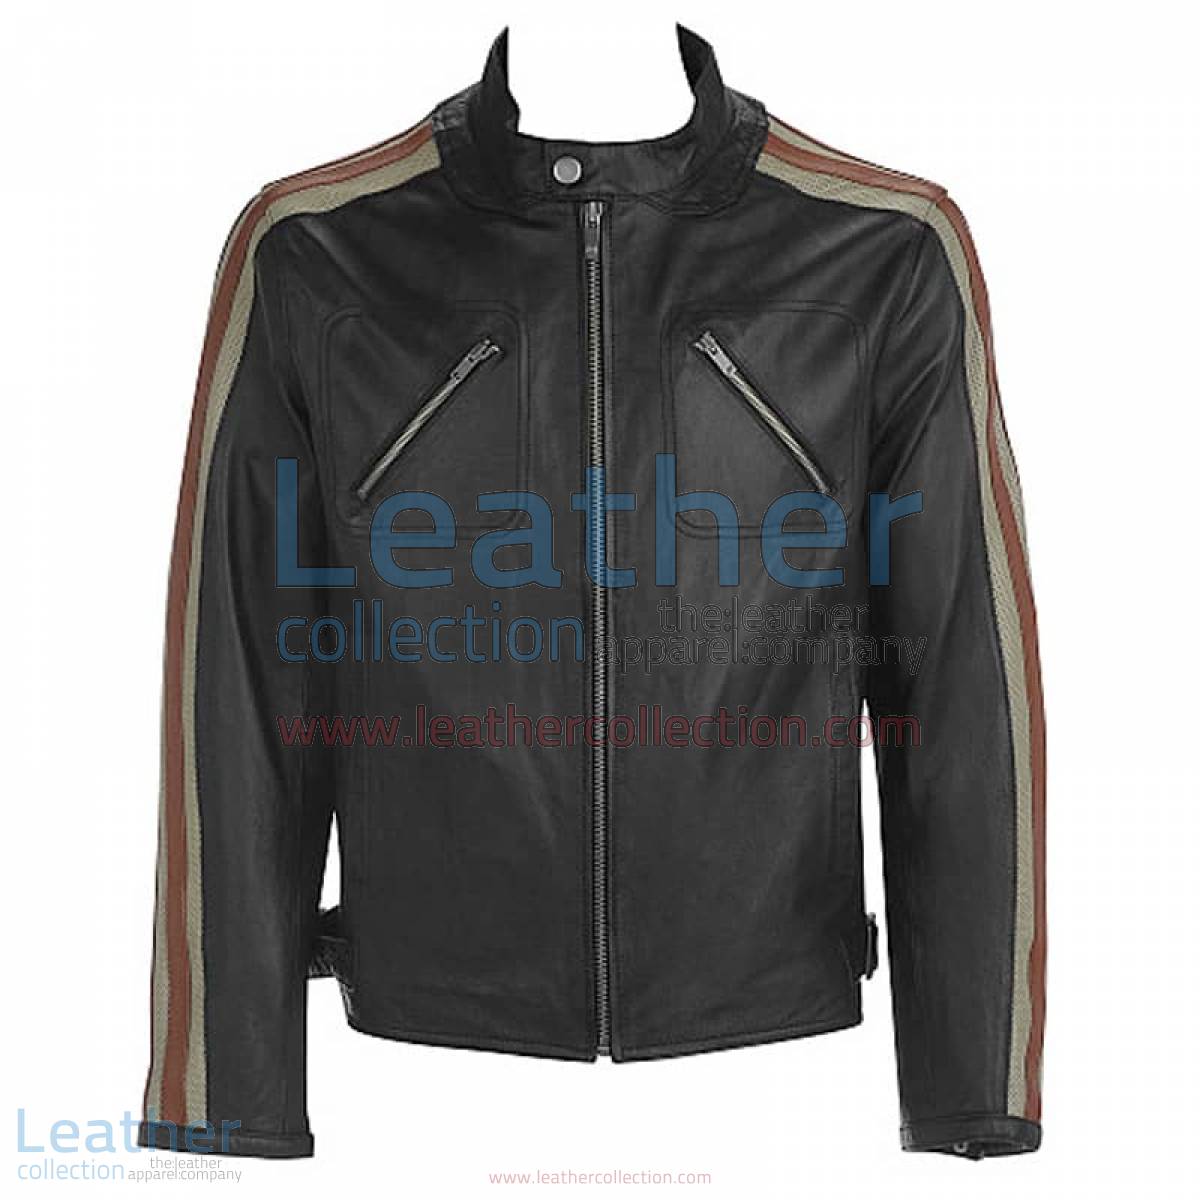 Leather Jacket With Stripes on Sleeves | leather jacket with stripes